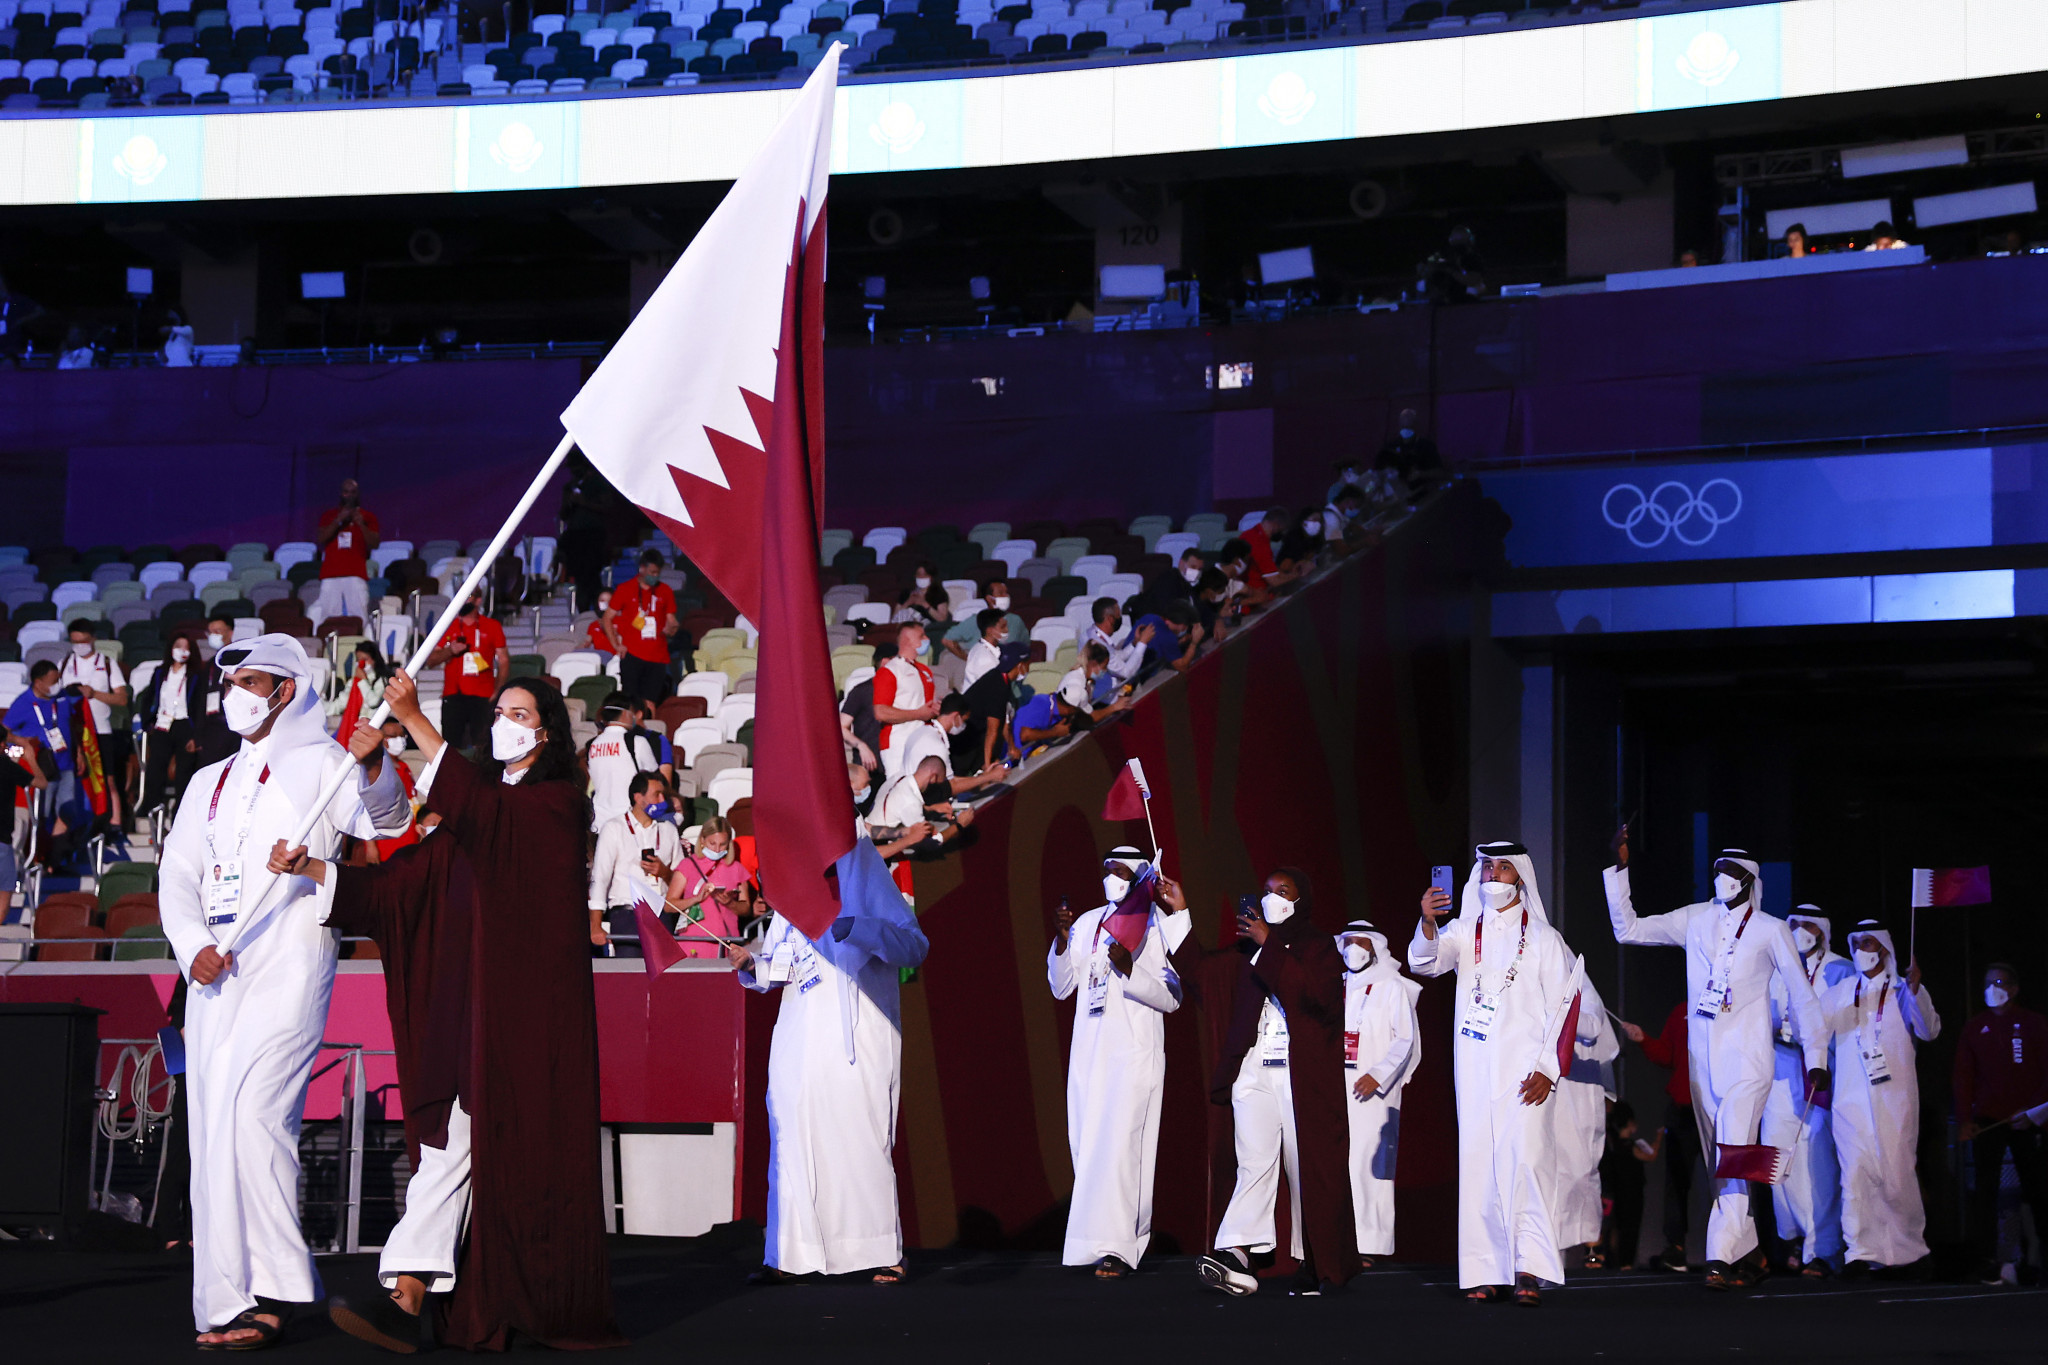 The Qatar Olympic Committee is celebrating officials being appointed to IOC bodies ©Getty mages